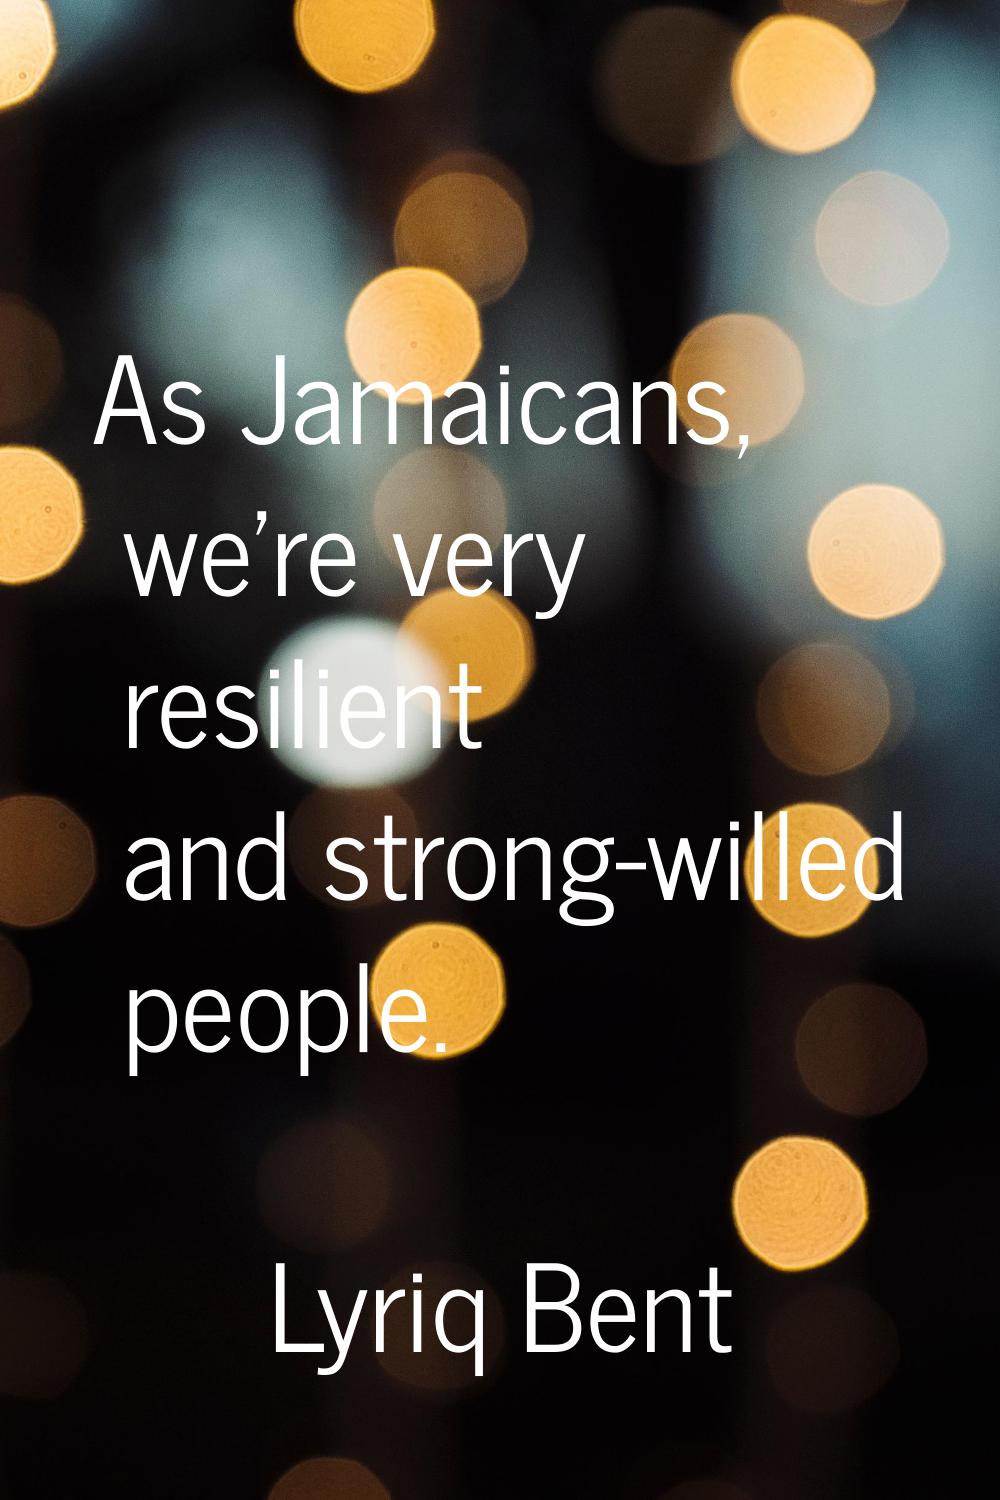 As Jamaicans, we're very resilient and strong-willed people.